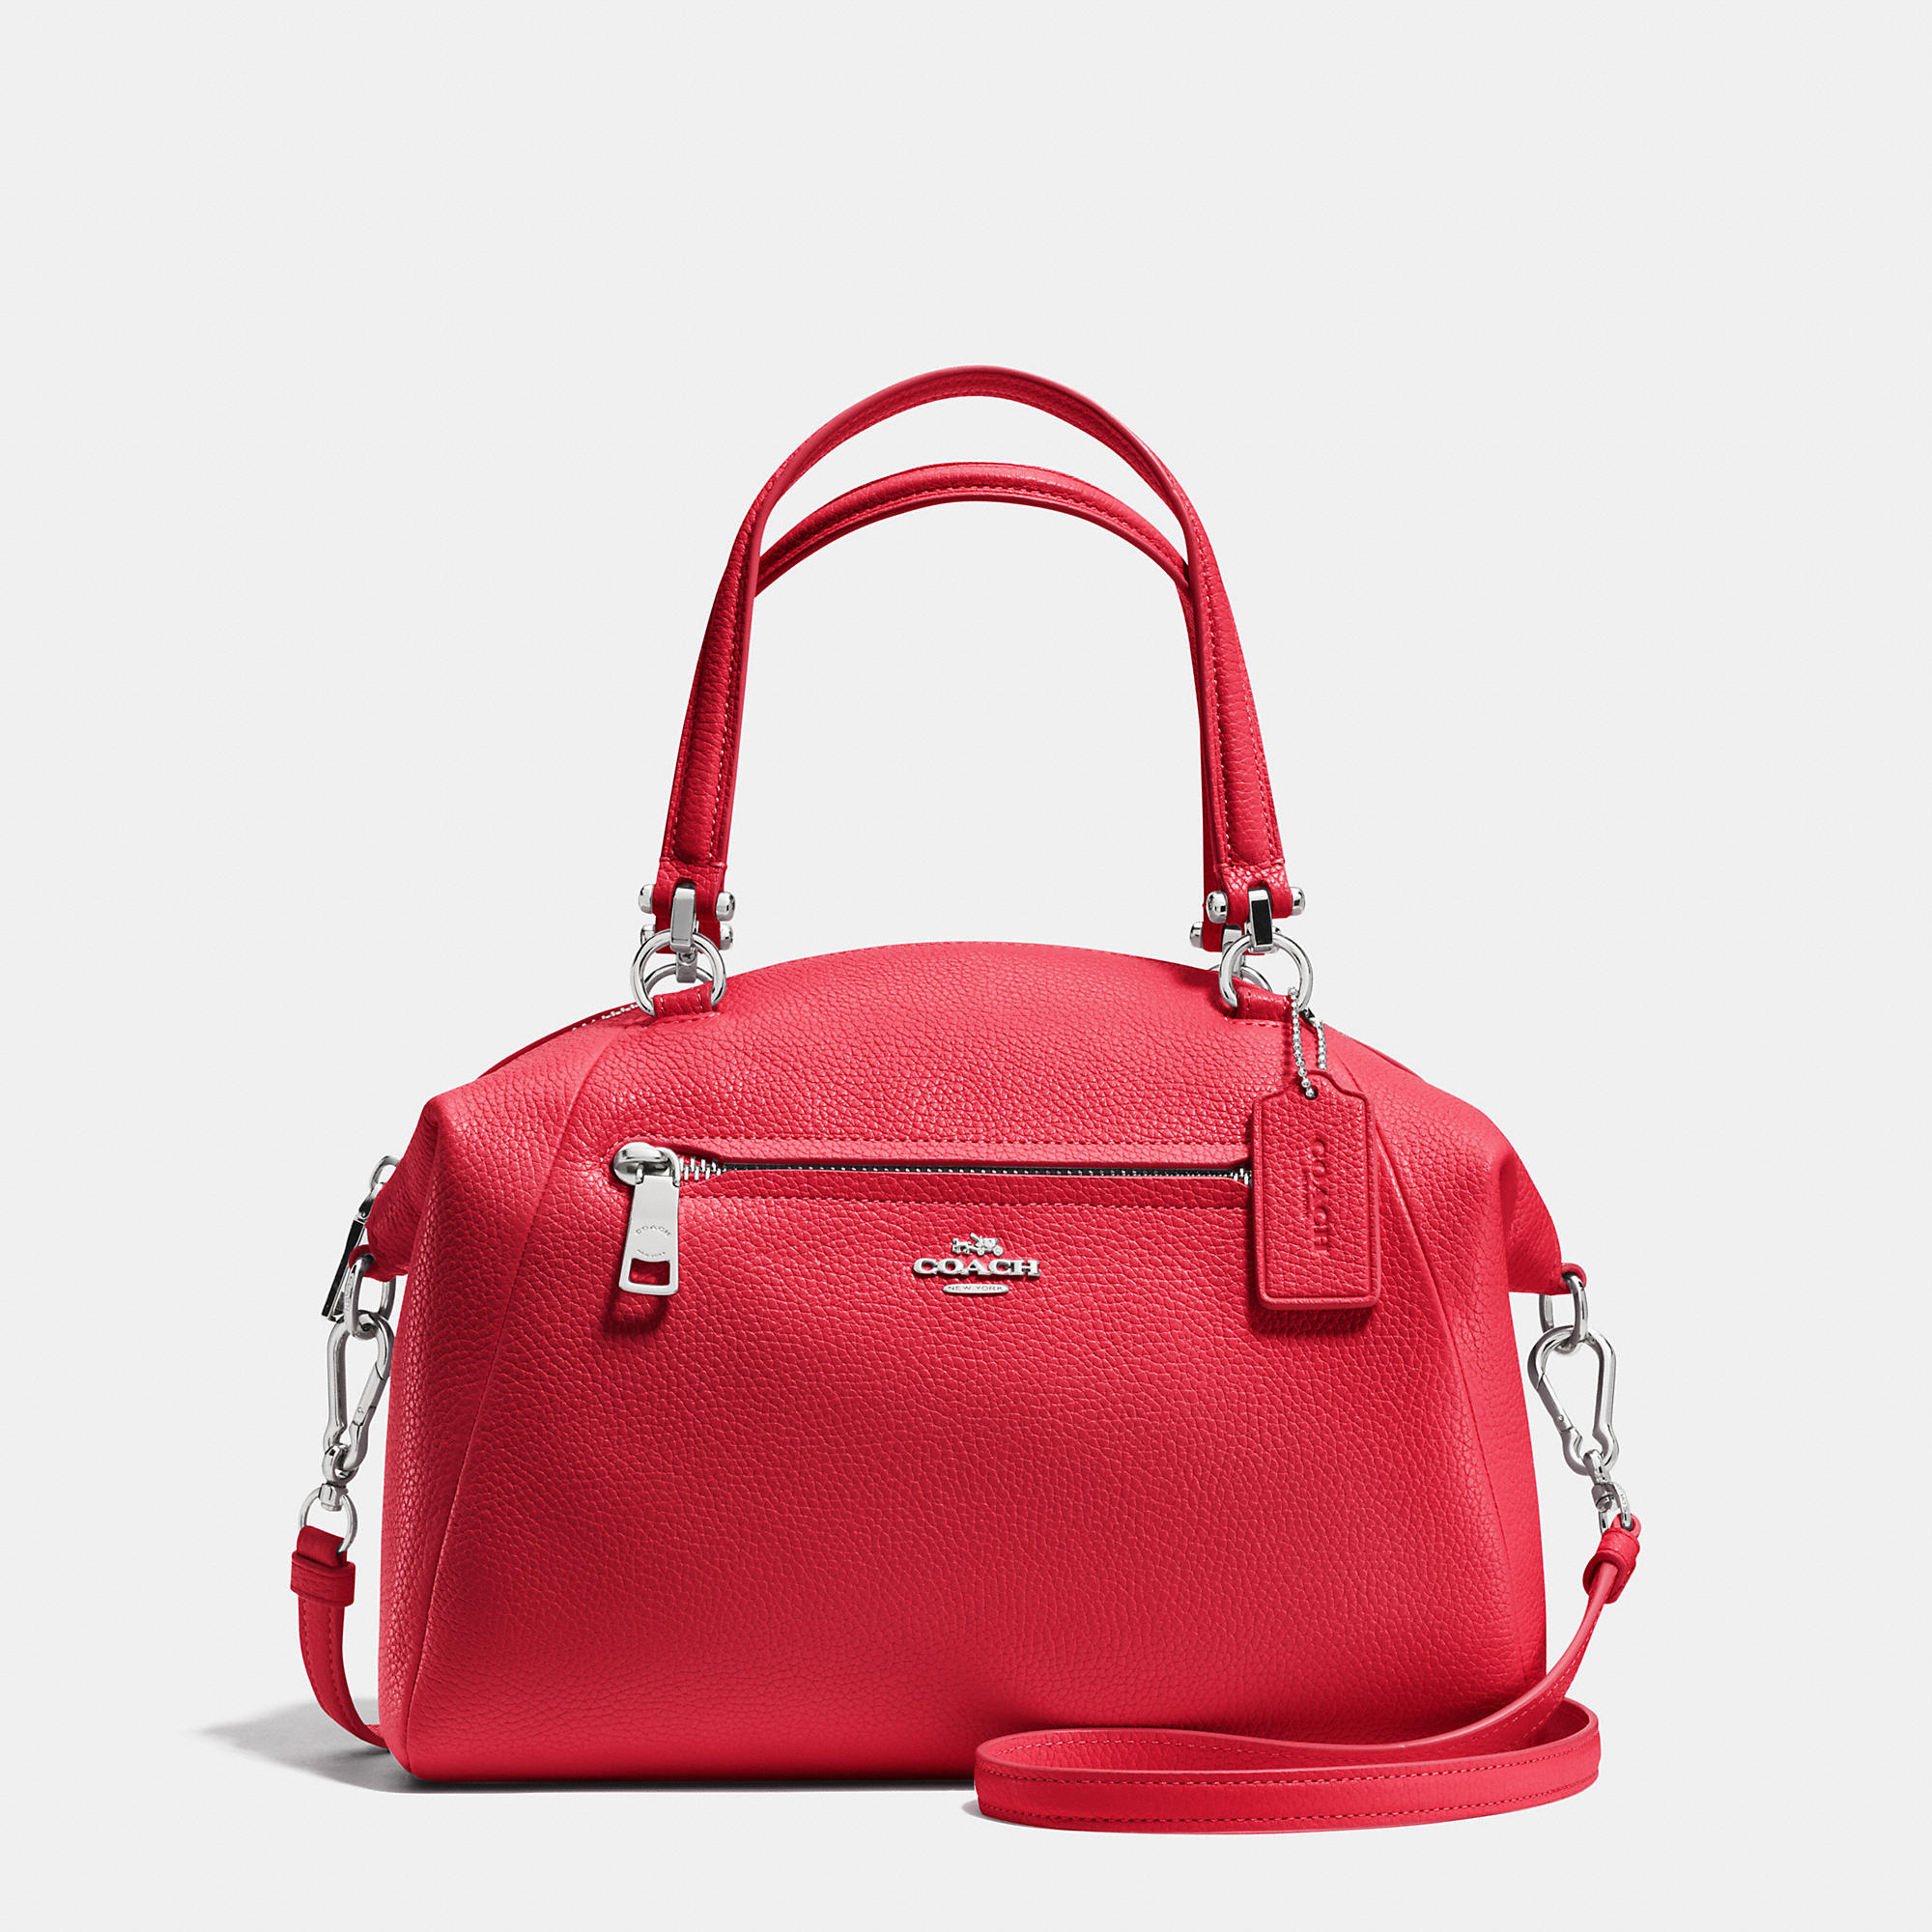 Embossing Coach Prairie Satchel In Pebble Leather | Coach Outlet Canada